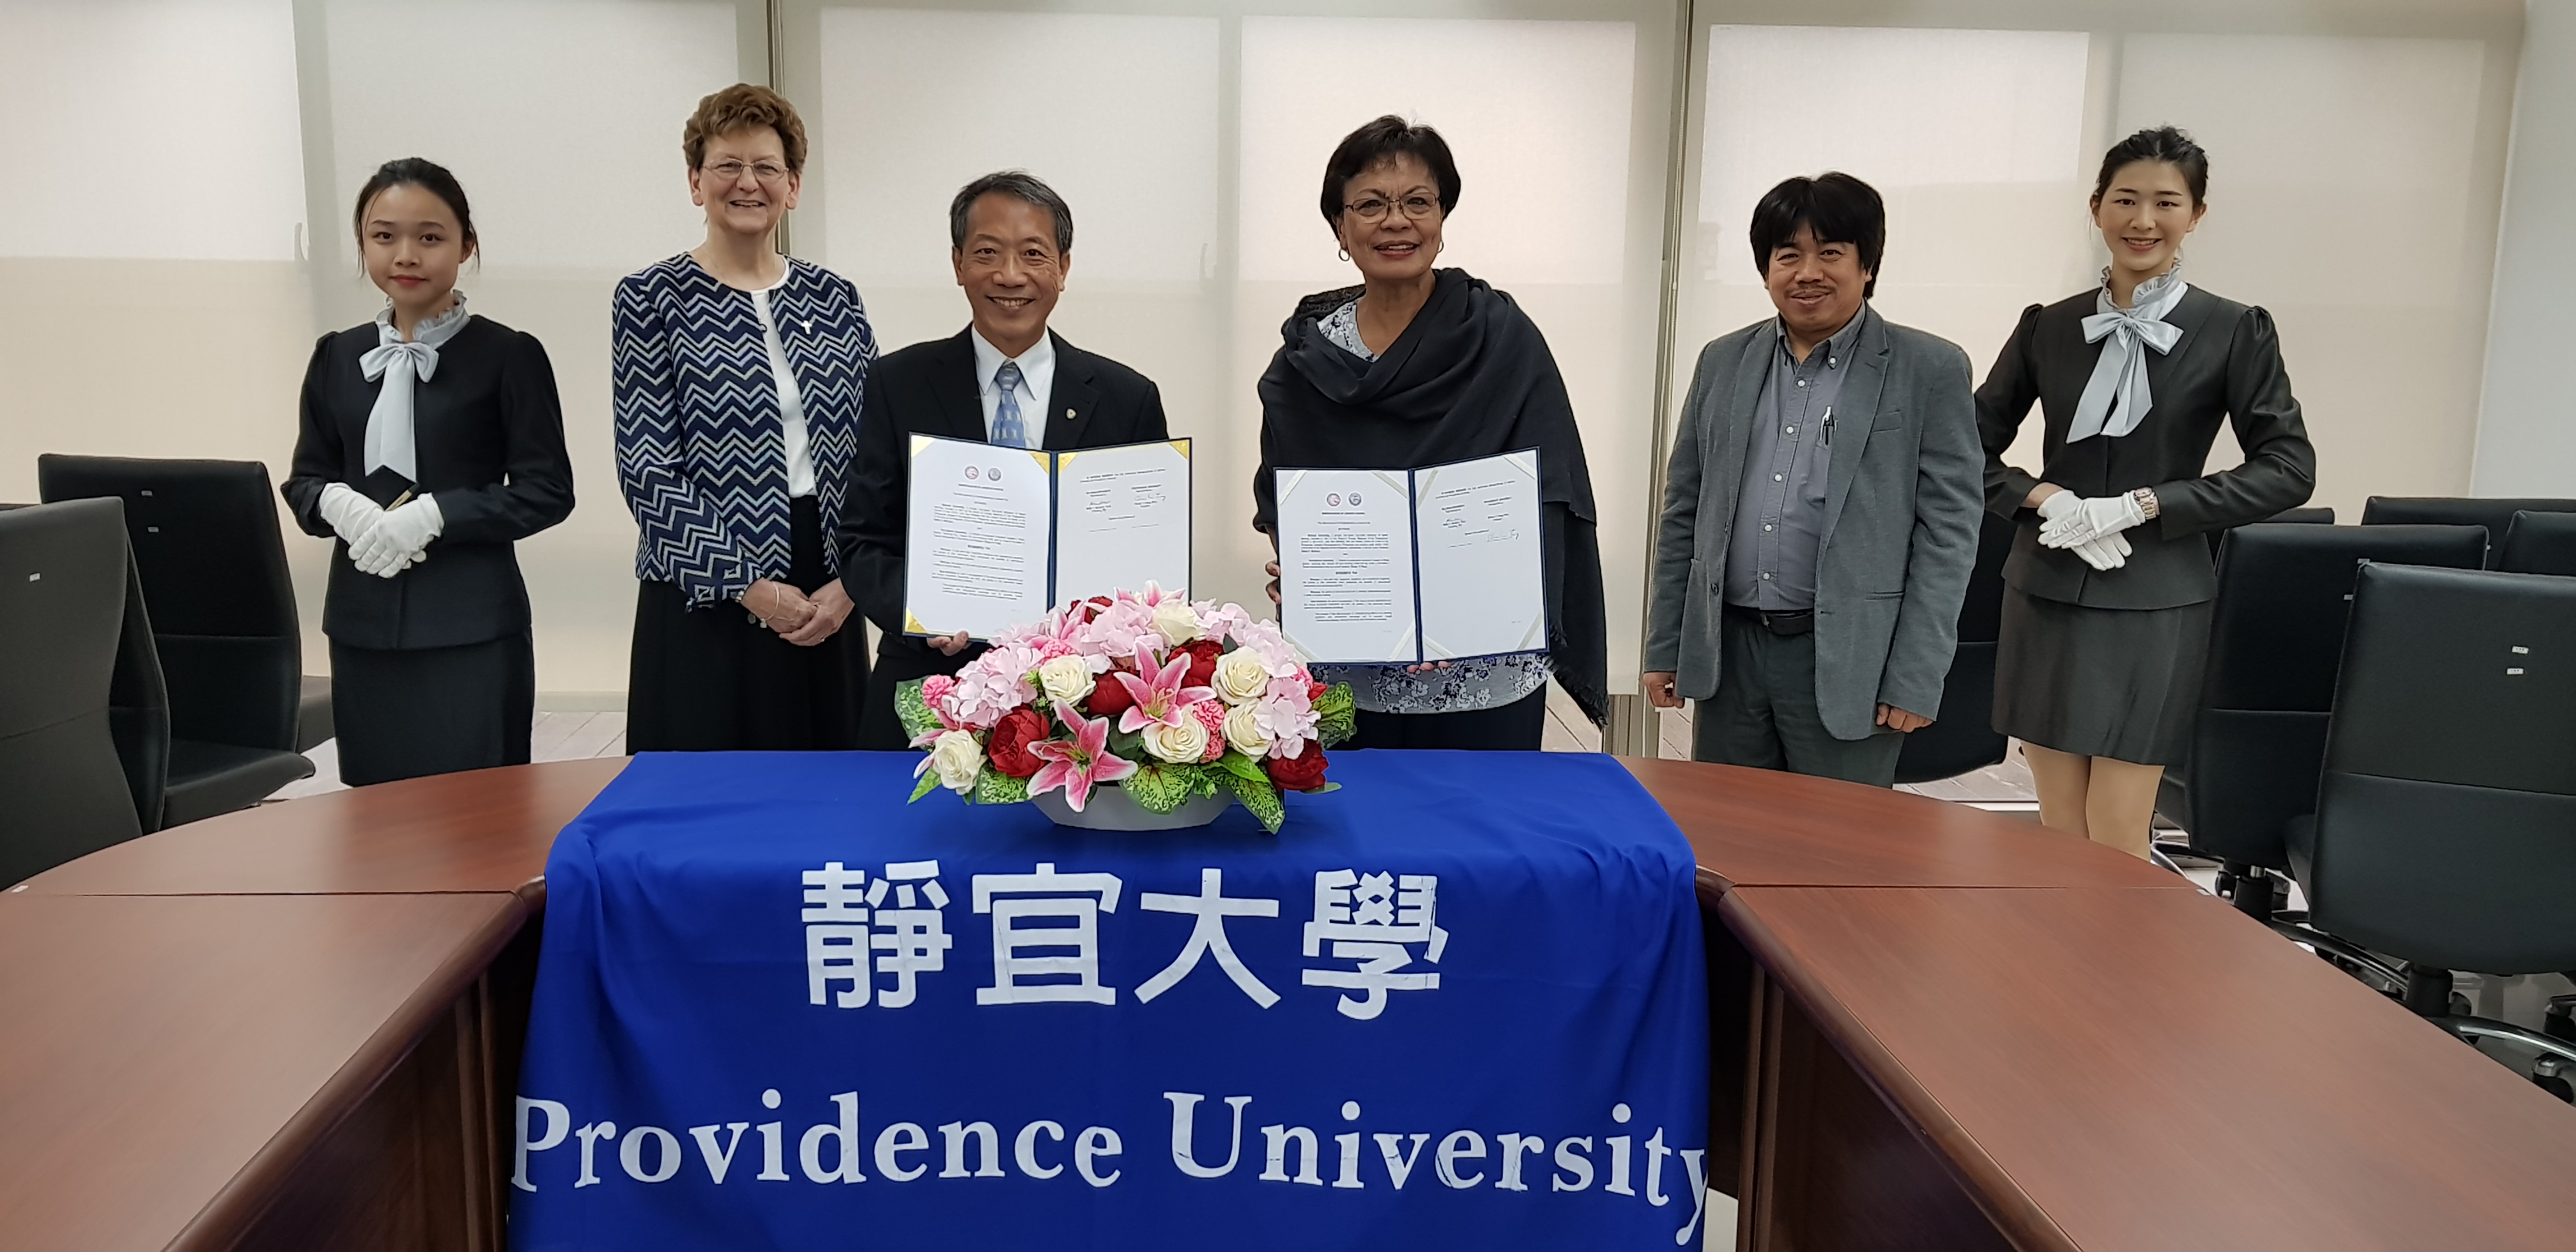 MoU signing with Taiwan-based Providence University